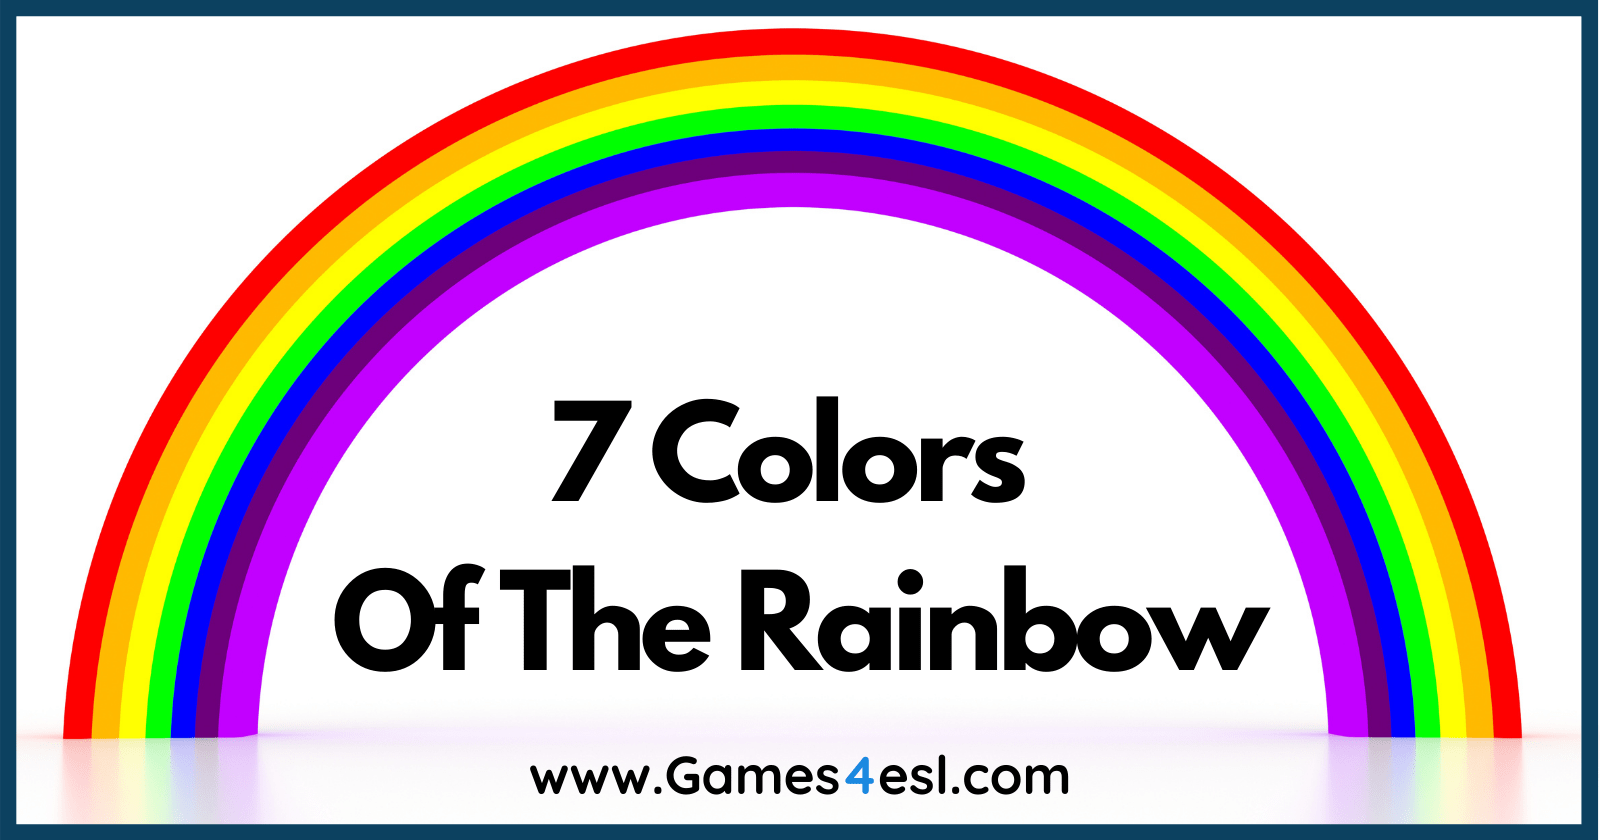 Seven Colors of the Rainbow